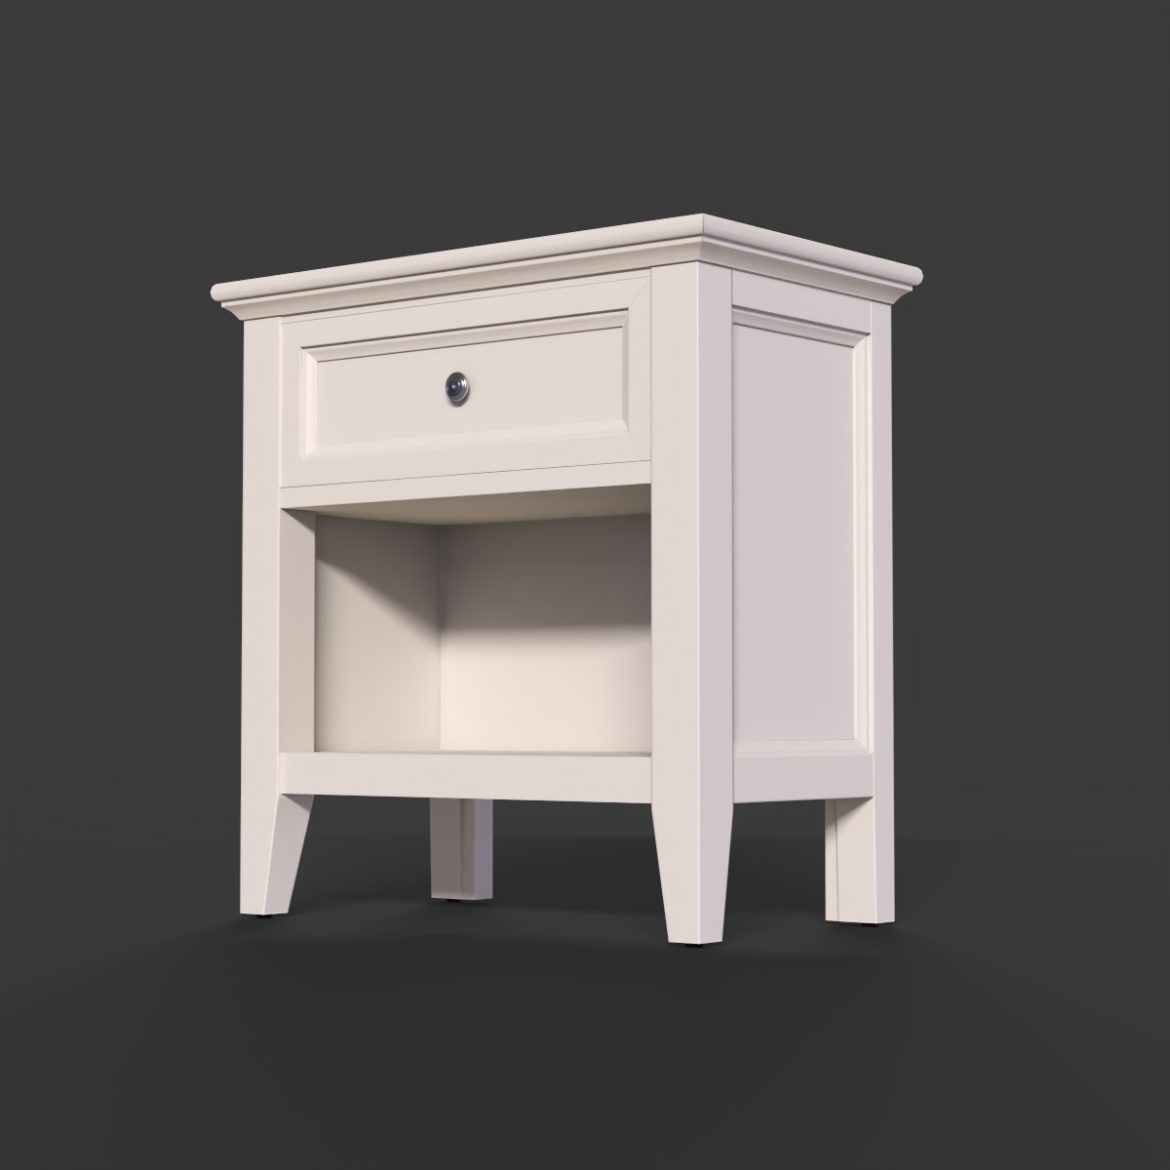  <a class="continue" href="https://www.flatpyramid.com/3d-models/furniture-3d-models/nightstand/">Continue Reading<span> NightStand</span></a>